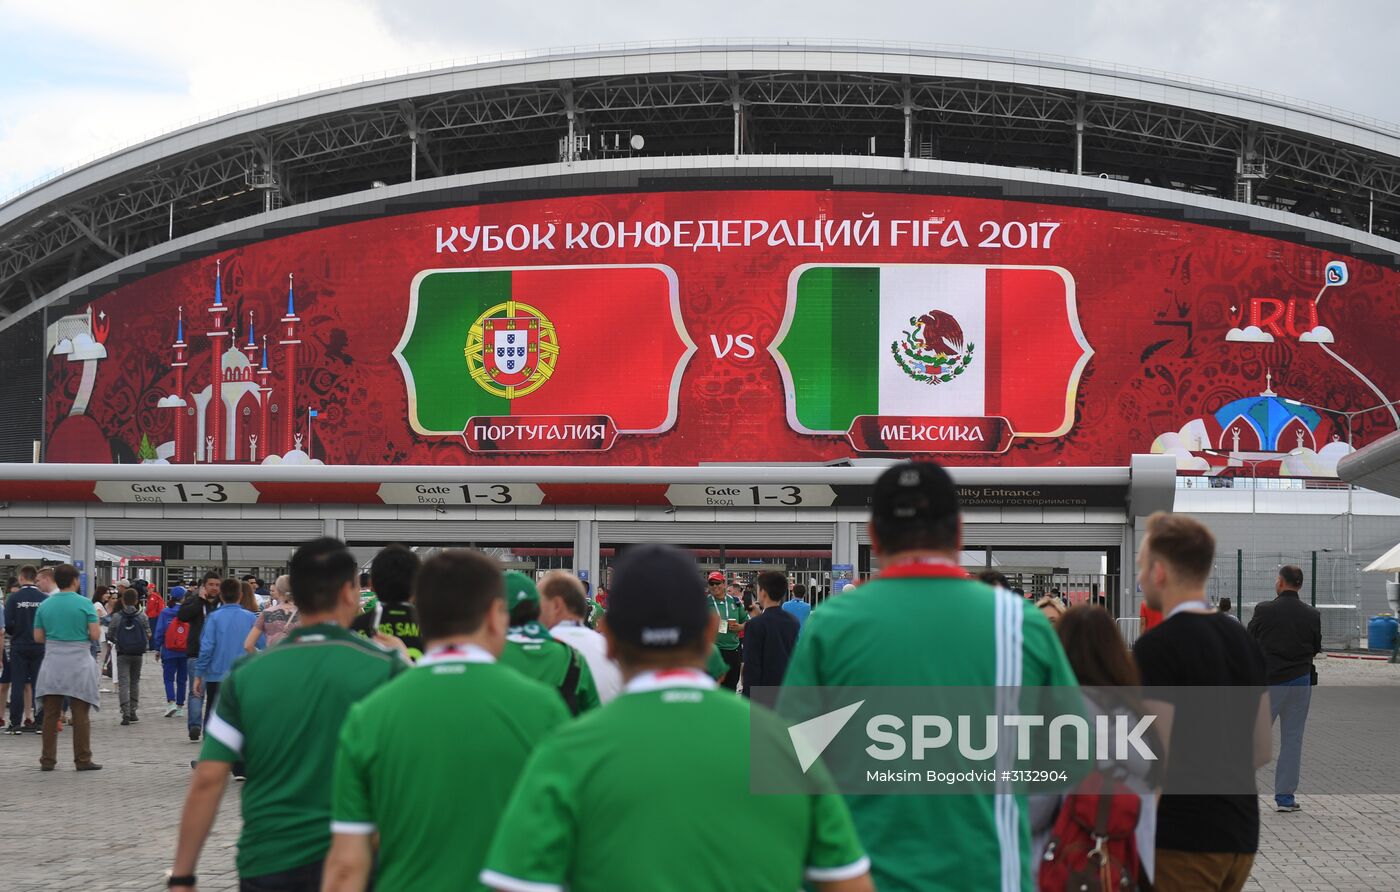 Kazan Arena before 2017 FIFA Confederations Cup match between Portugal and Mexico